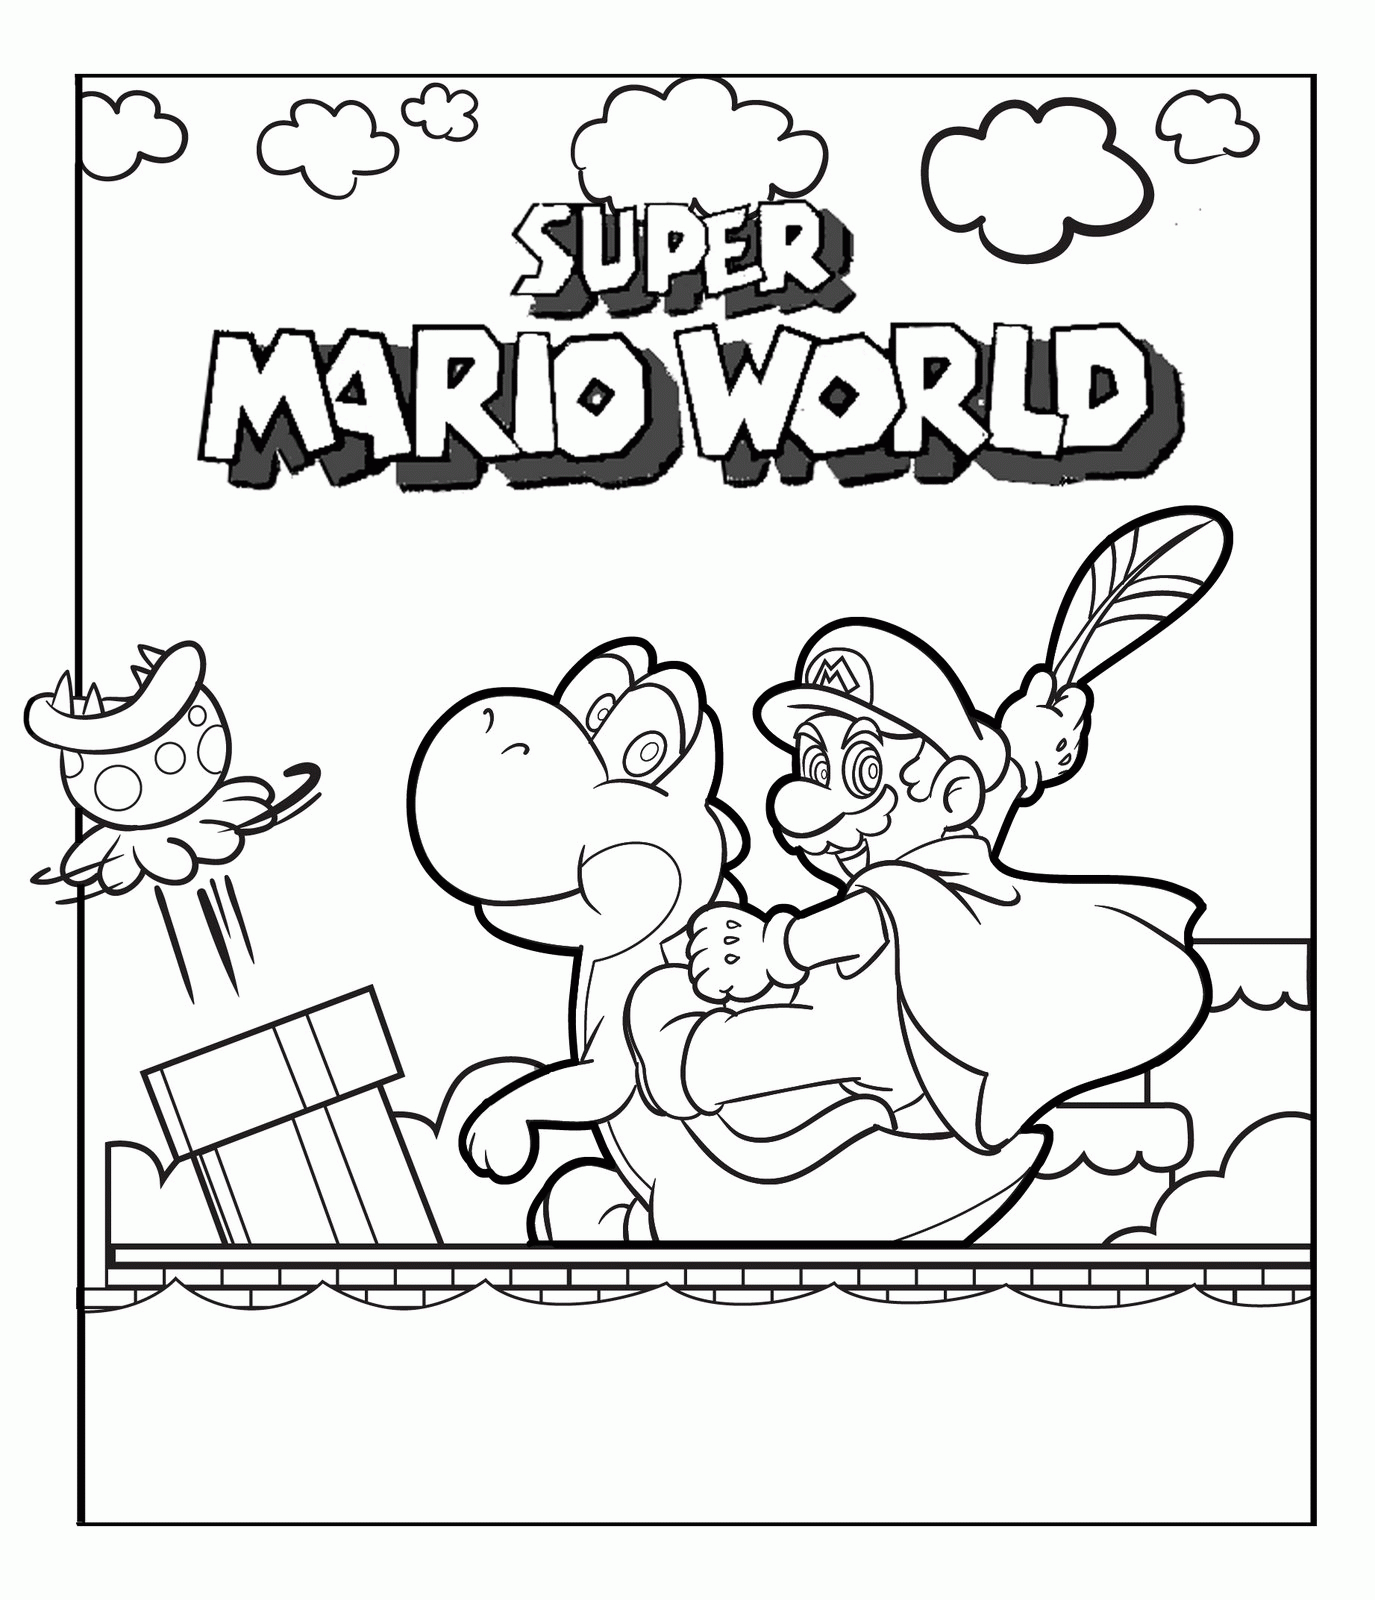 75  Coloring Pages Yoshi  Latest